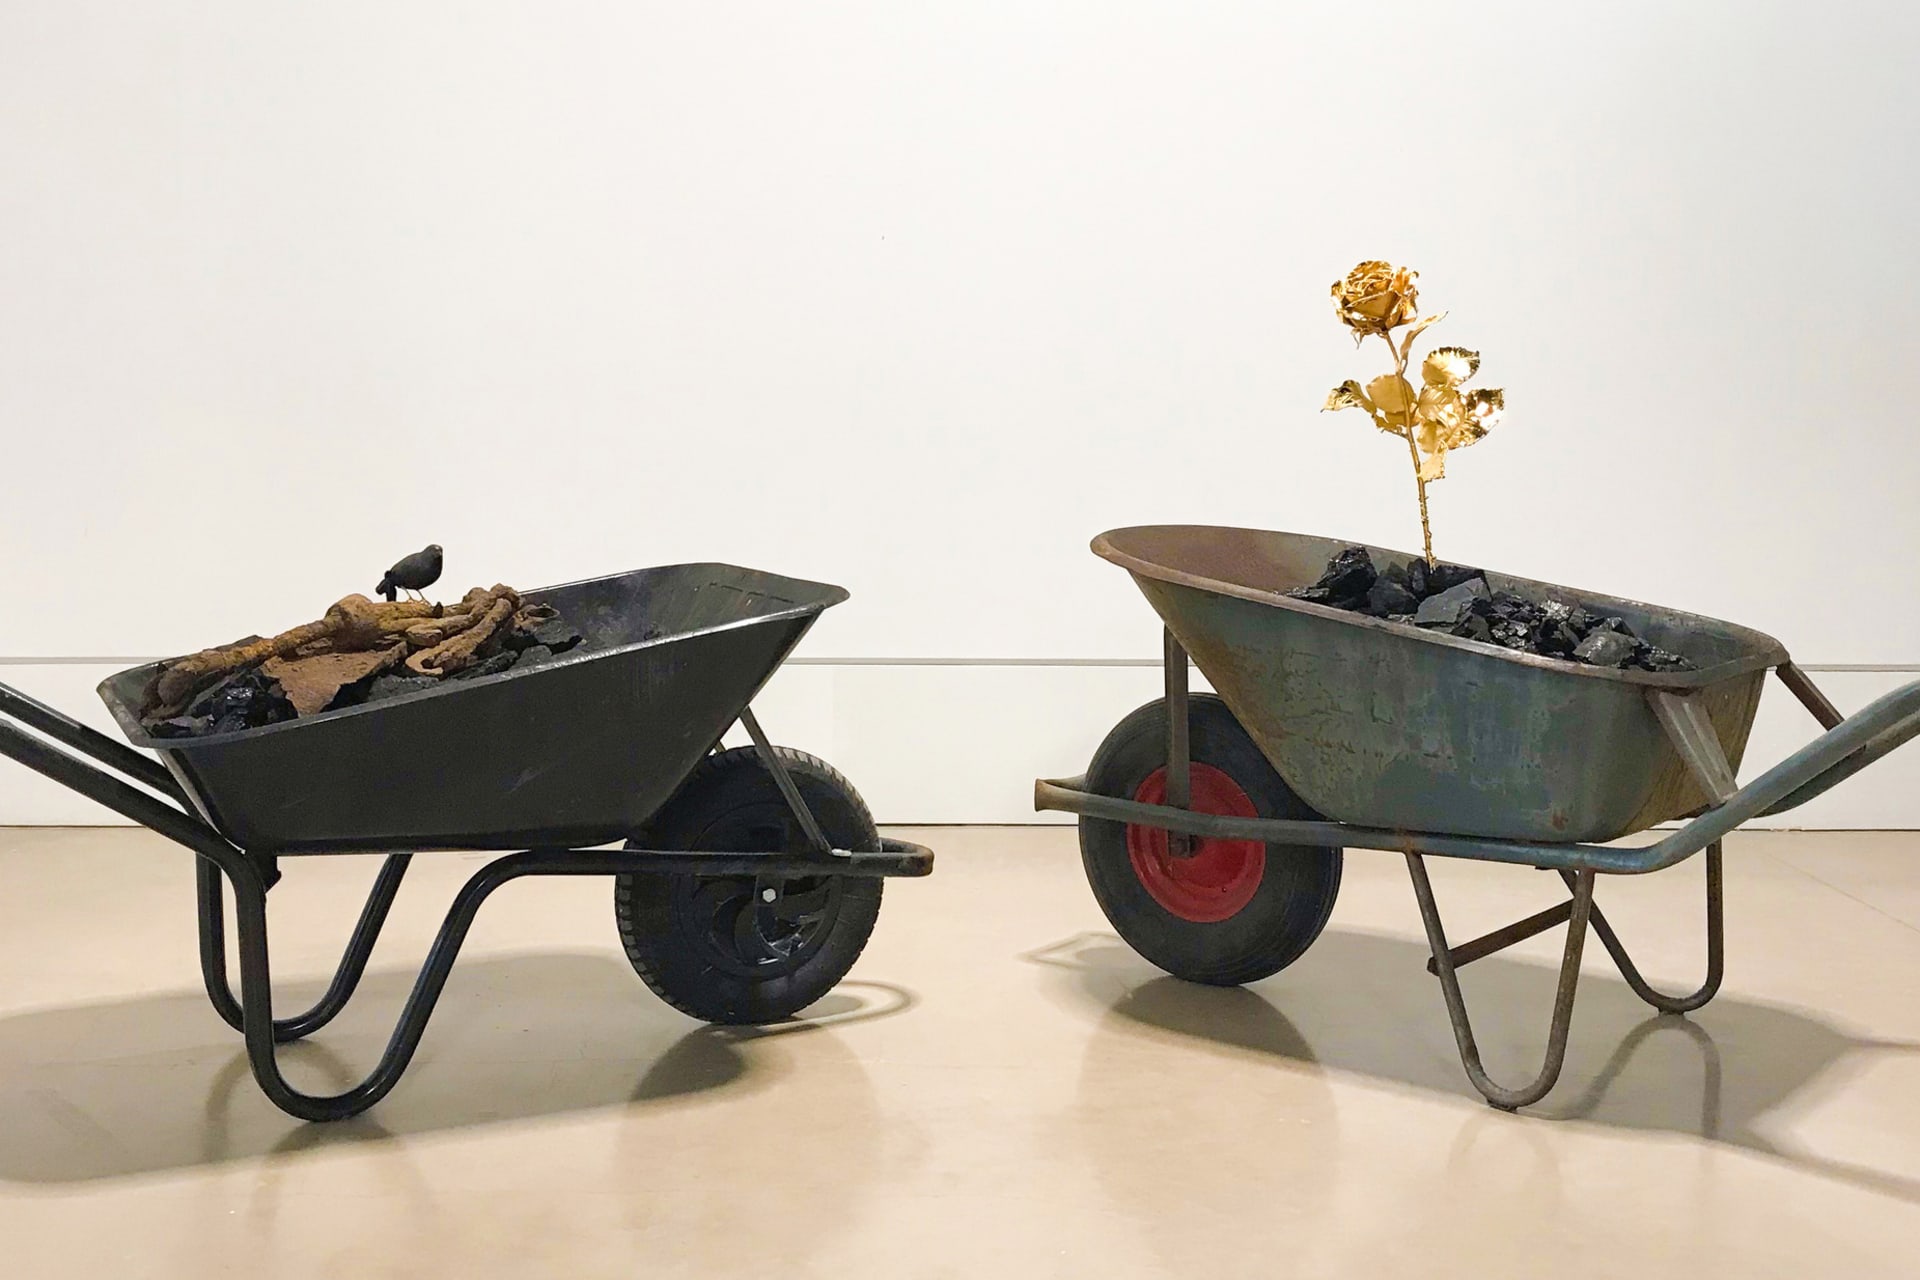 Two rusty old wheelbarrows, filled with black coal. One features a life-size golden rose, the other a black small bird.